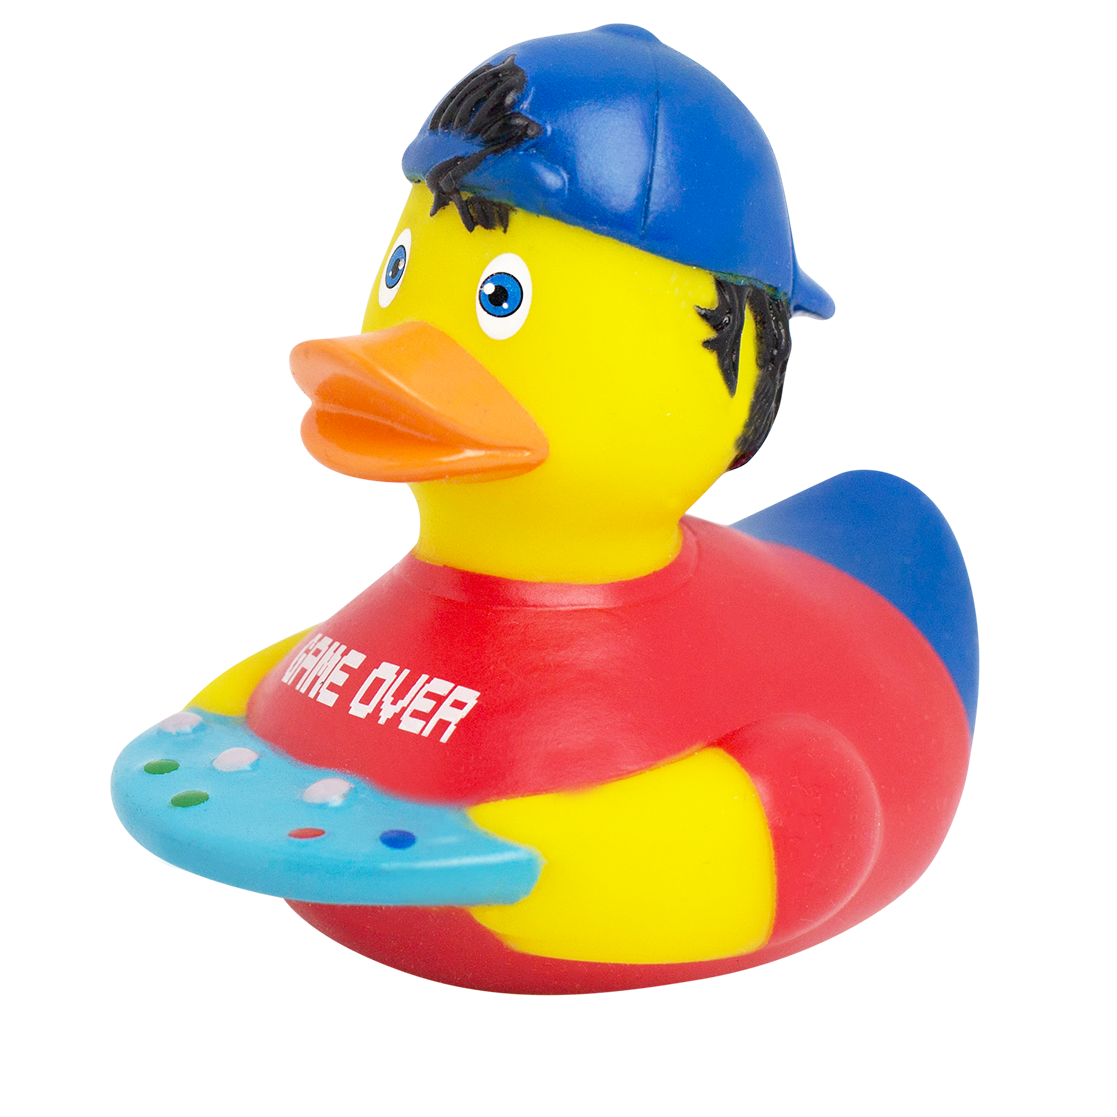 Gaming duck